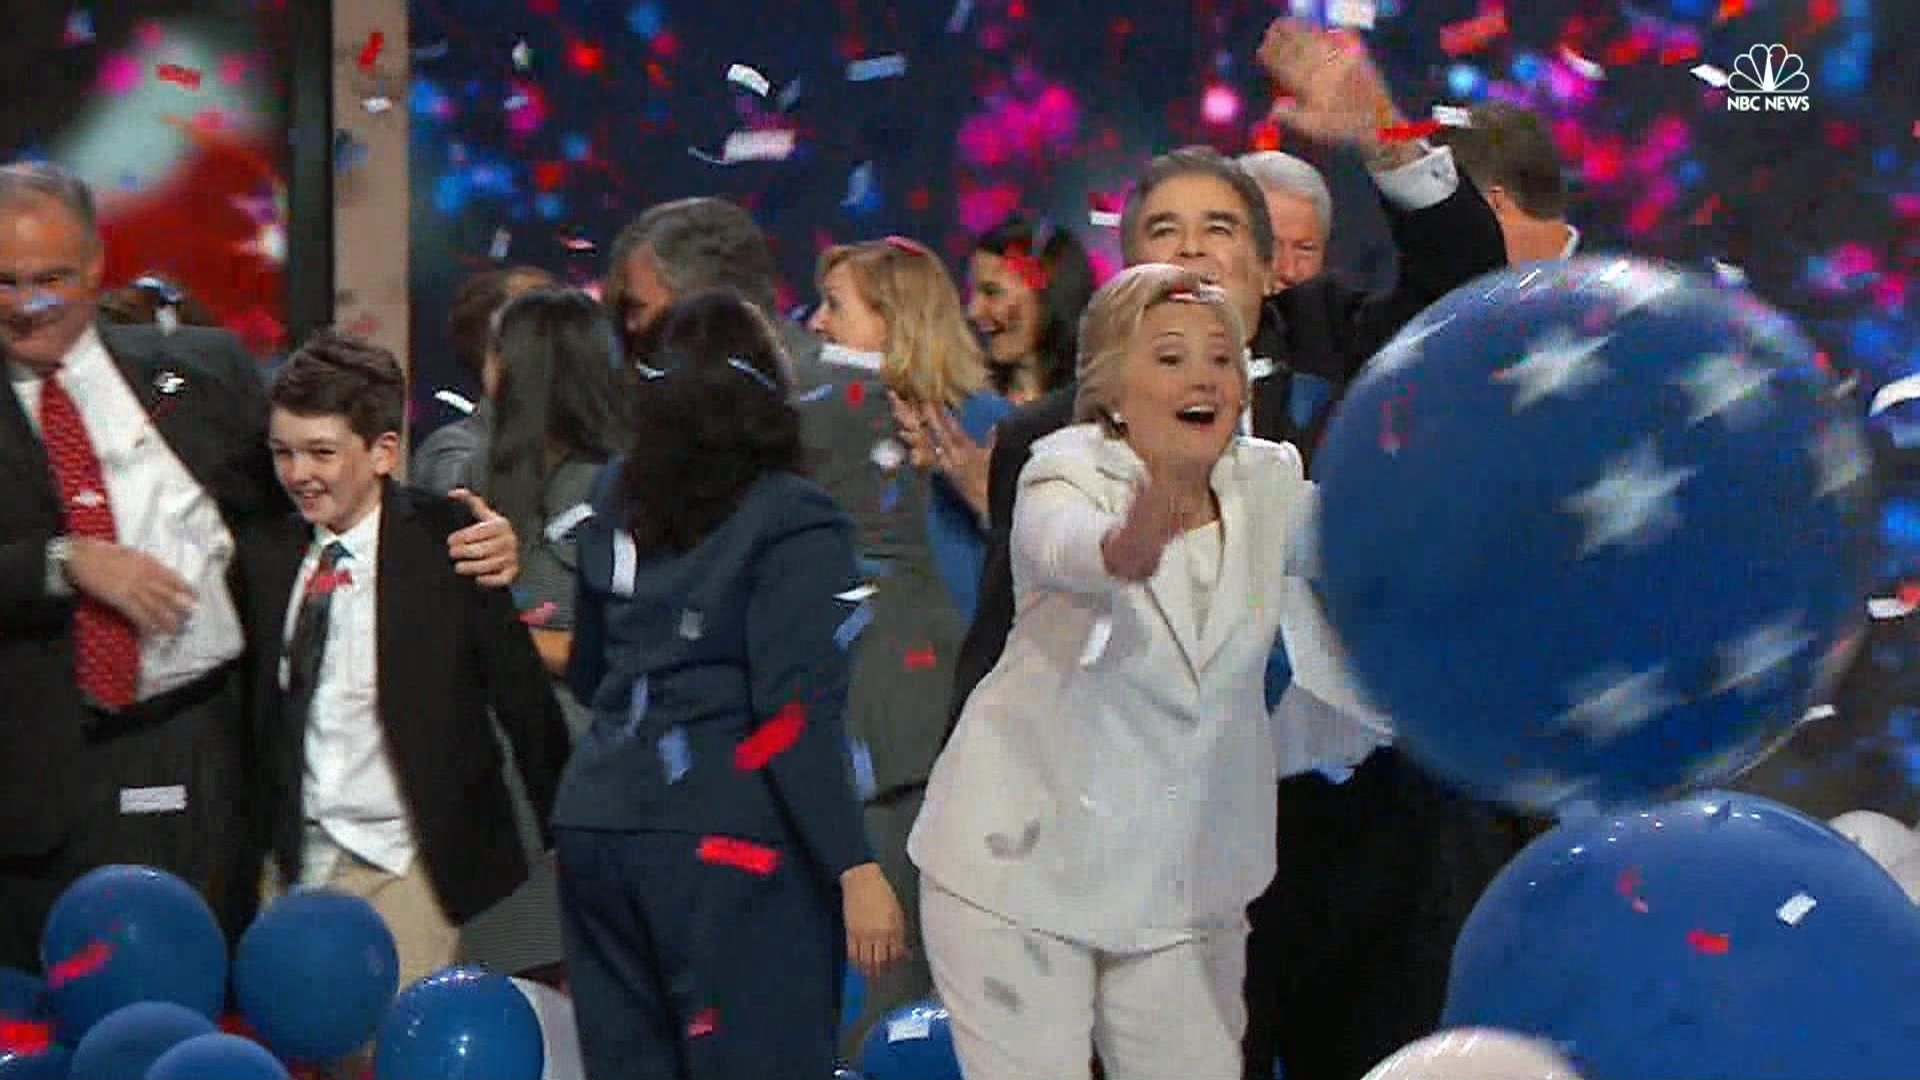 Moedig Plantkunde Luxe On Historic Night, Hillary Clinton Favors Pragmatism Over Flair